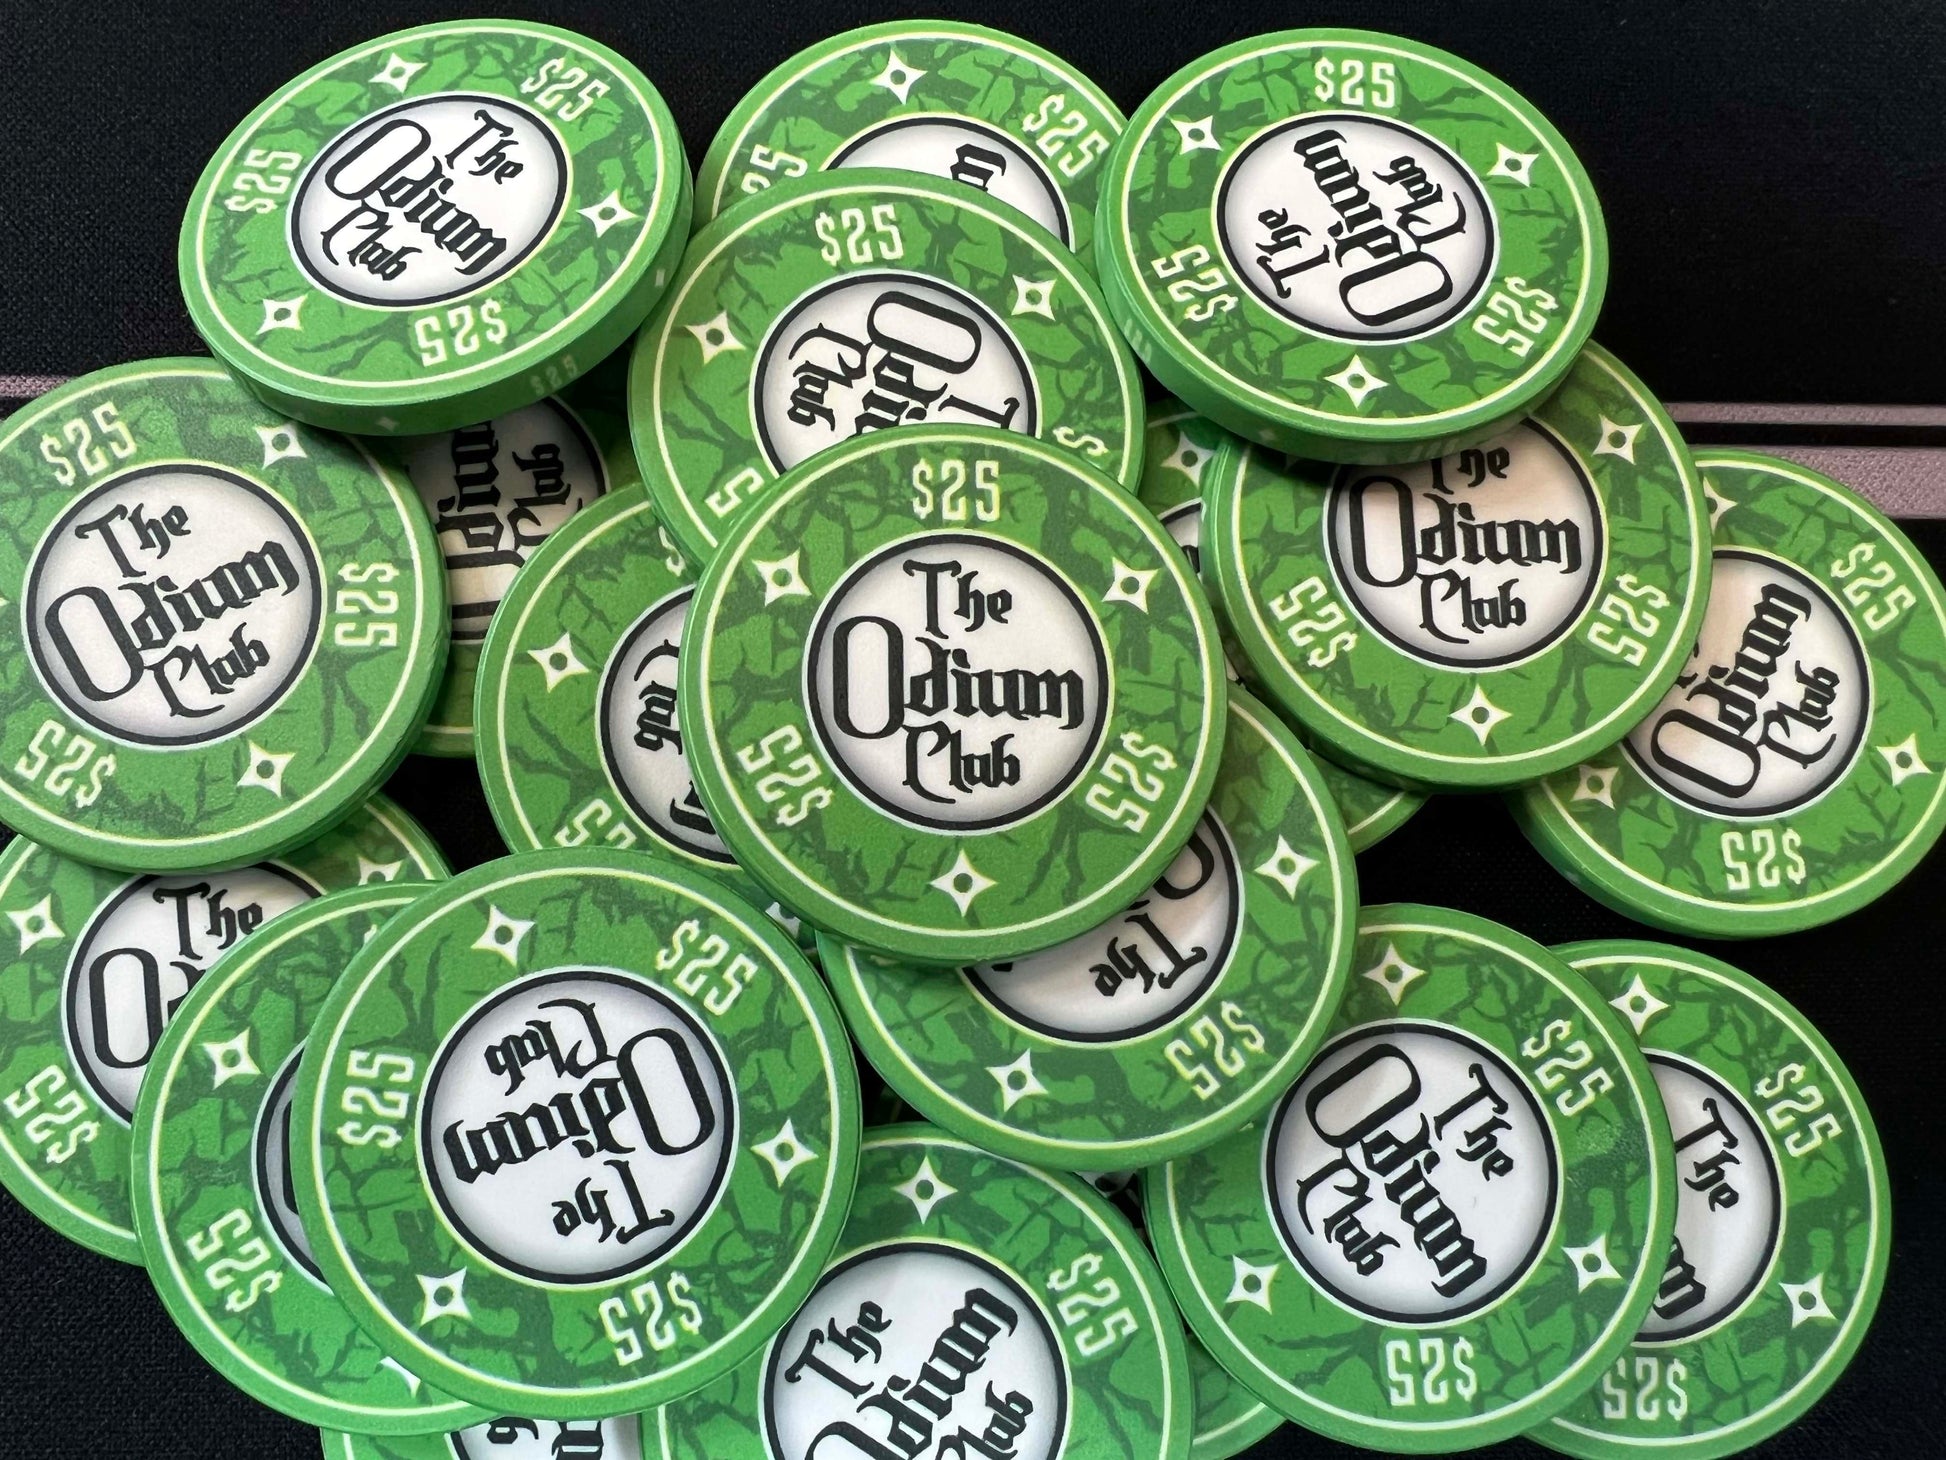 Shown here are the Odium Club 25 dollar green poker chips in a huge pot. These are 39mm chips (actually closer to 40mm), which is the most common poker chip size. They are the conventional poker chip thickness of 3.3mm or 0.13 inches. Whether you're a professional poker player who needs $25 chips for his or her mid-to-high stakes poker nights...or whether you're a burgeoning card room, these chips will get improve your poker game.